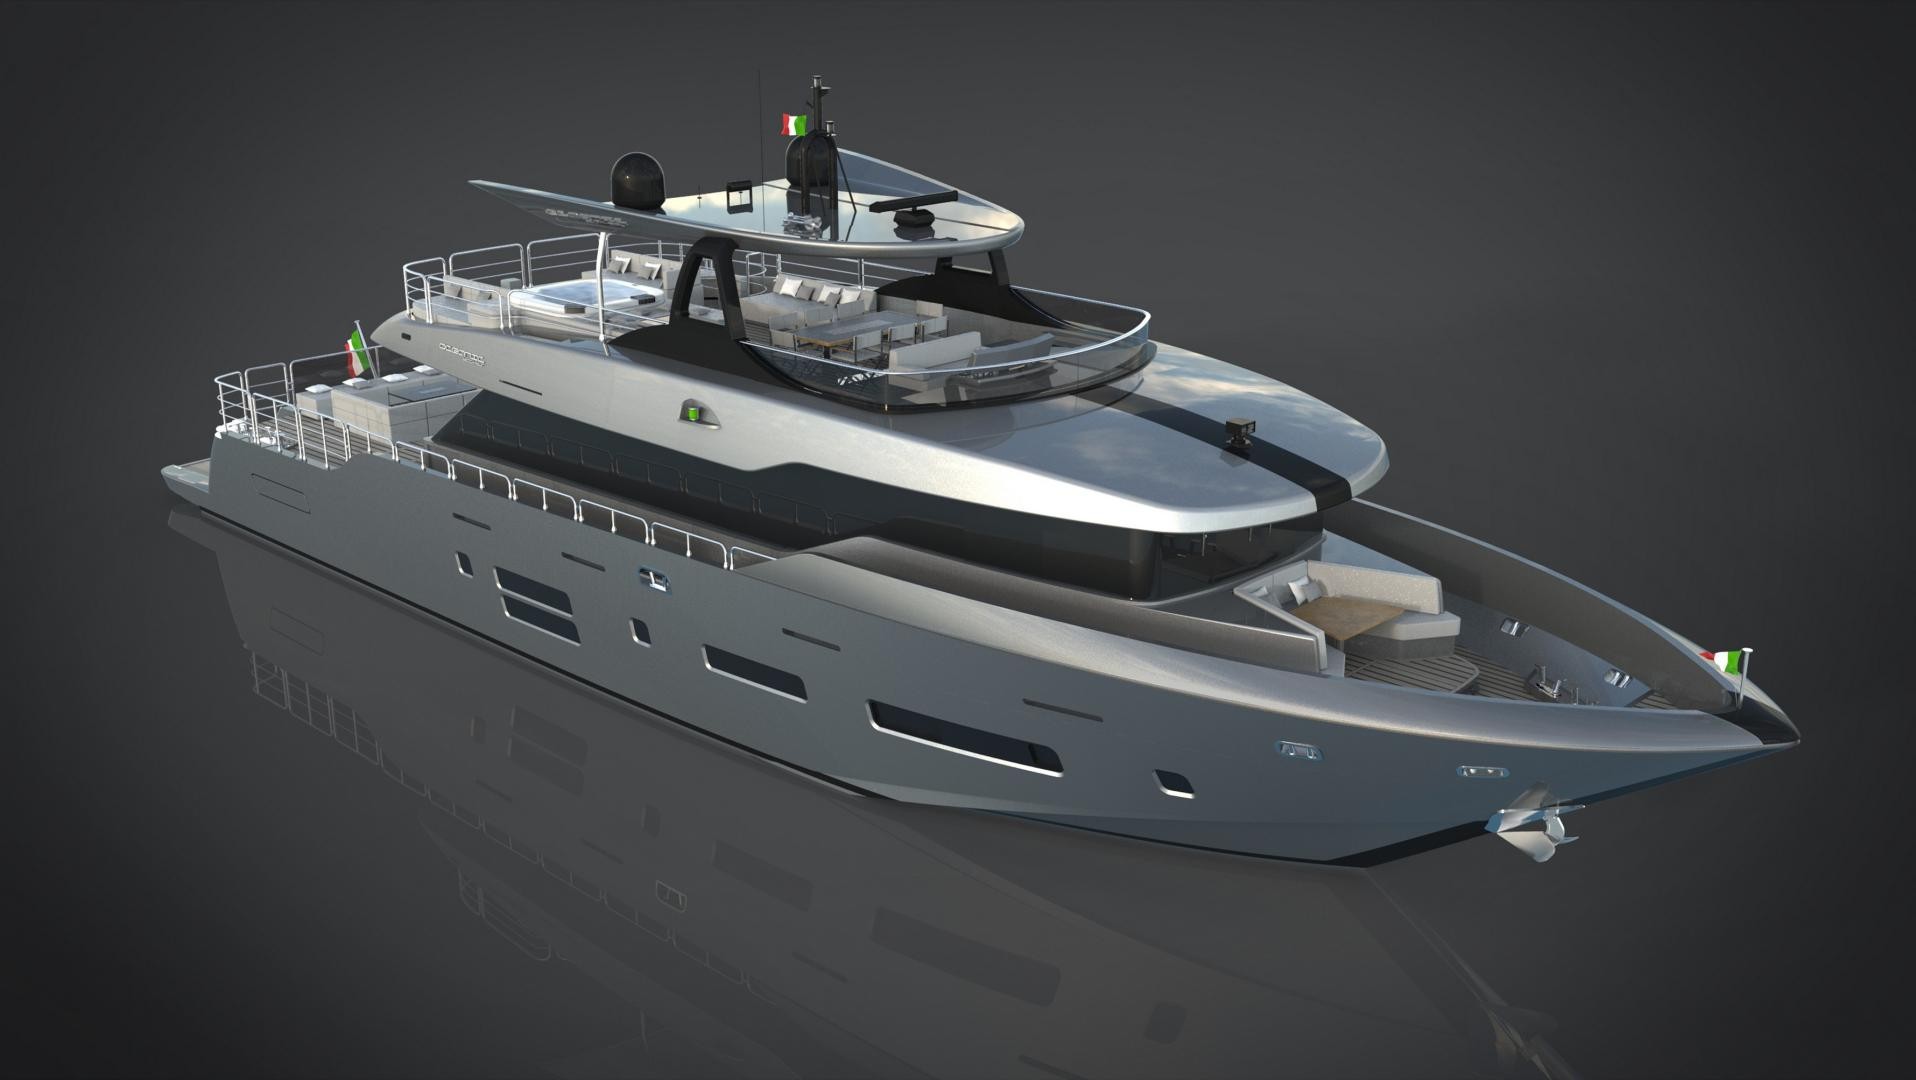 Oceanic Yachts is the Fast Expedition Yacht line by iconic Roman shipyard Canados